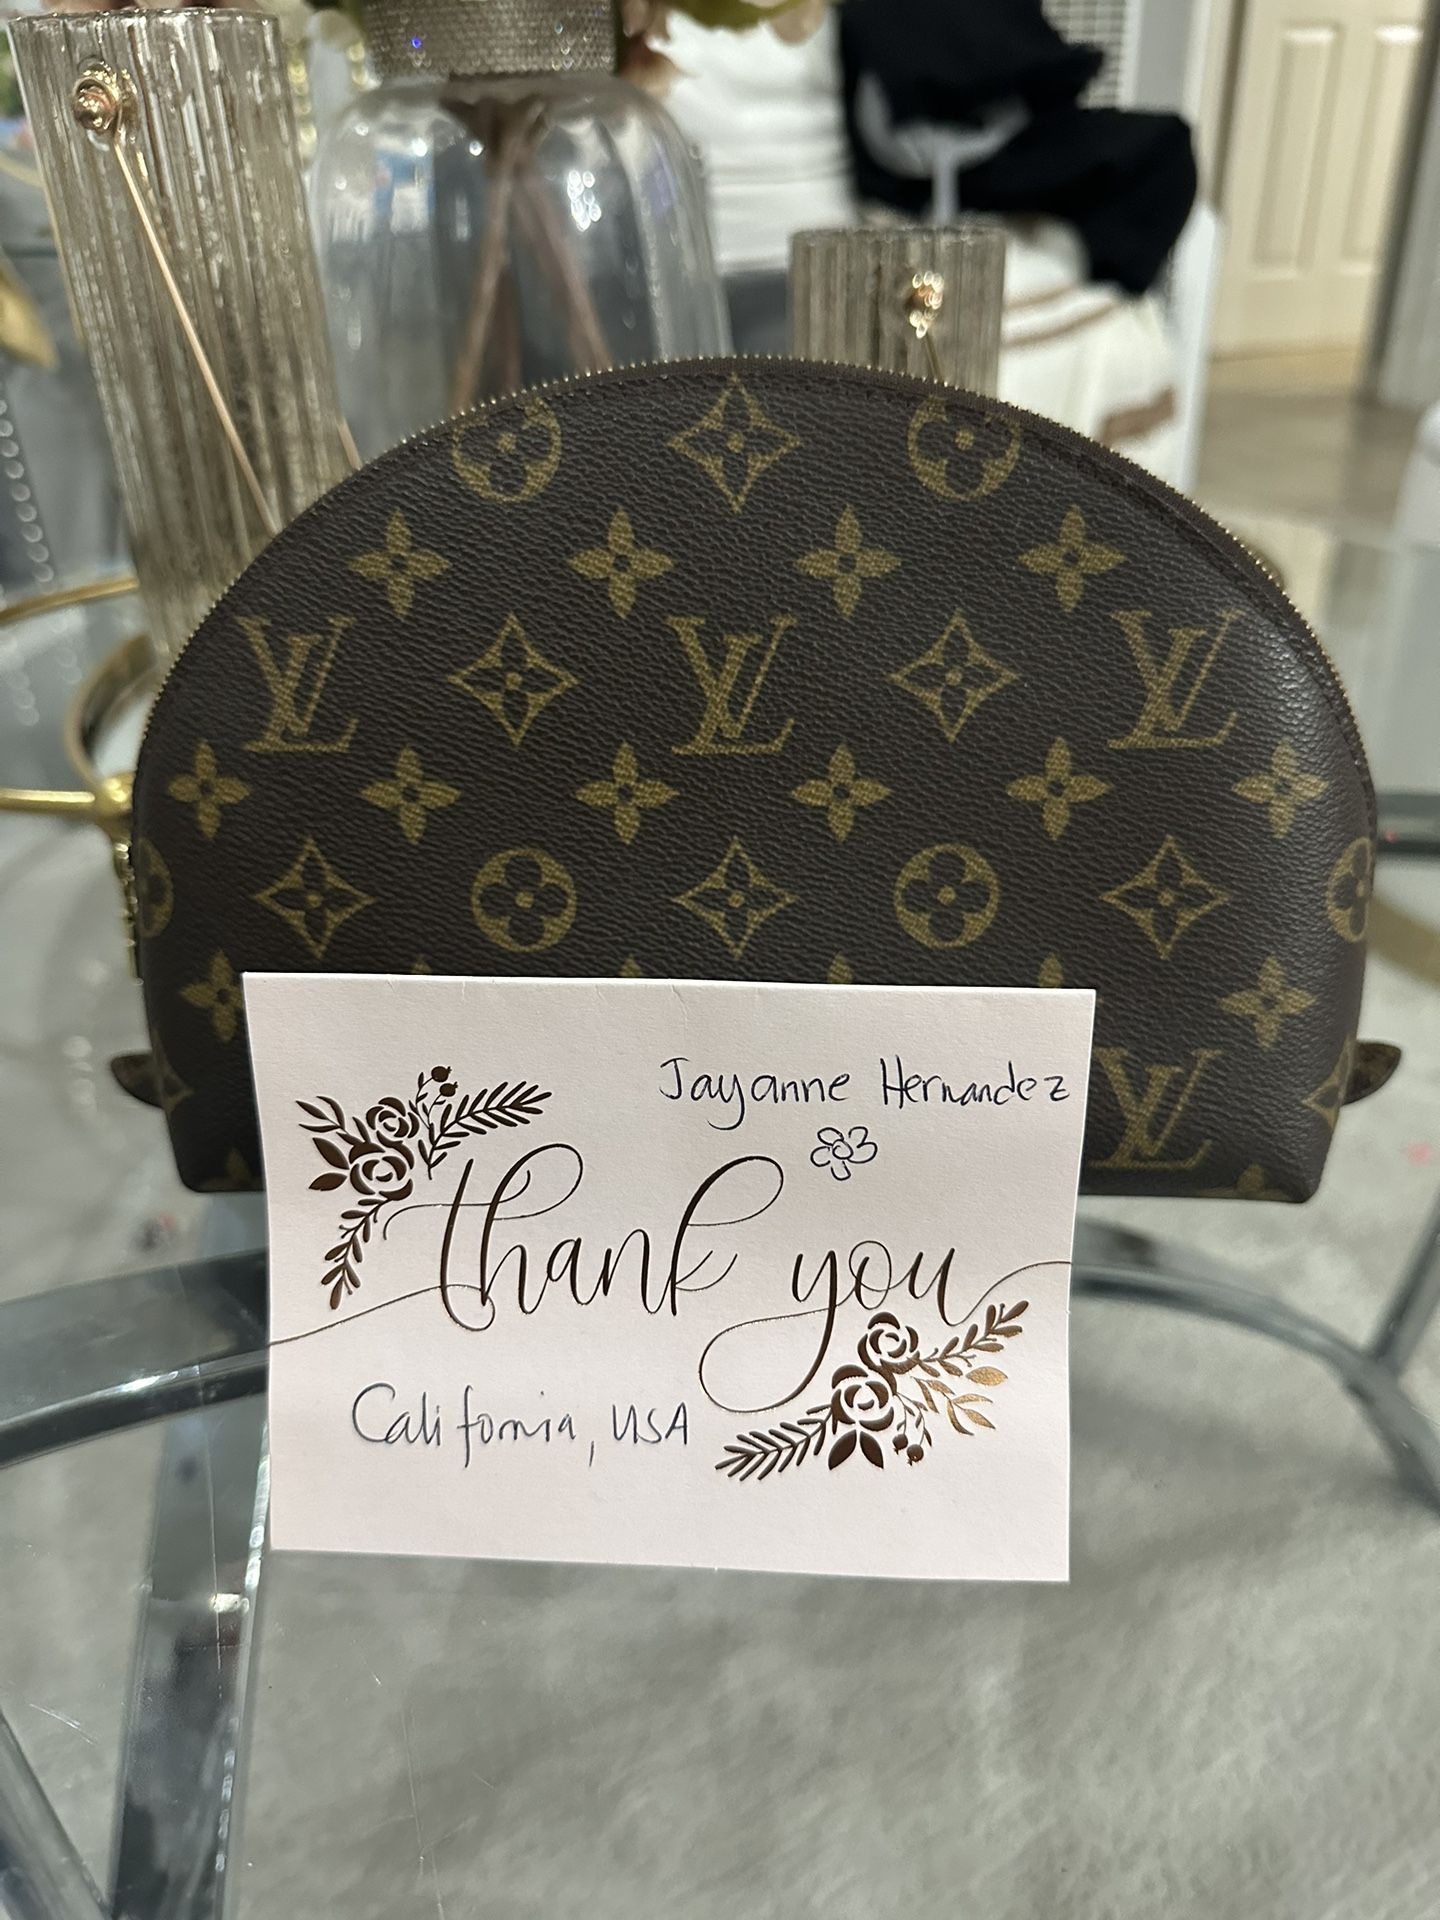 Louis Vuitton Large Make Up Pouch for Sale in South Gate, CA - OfferUp